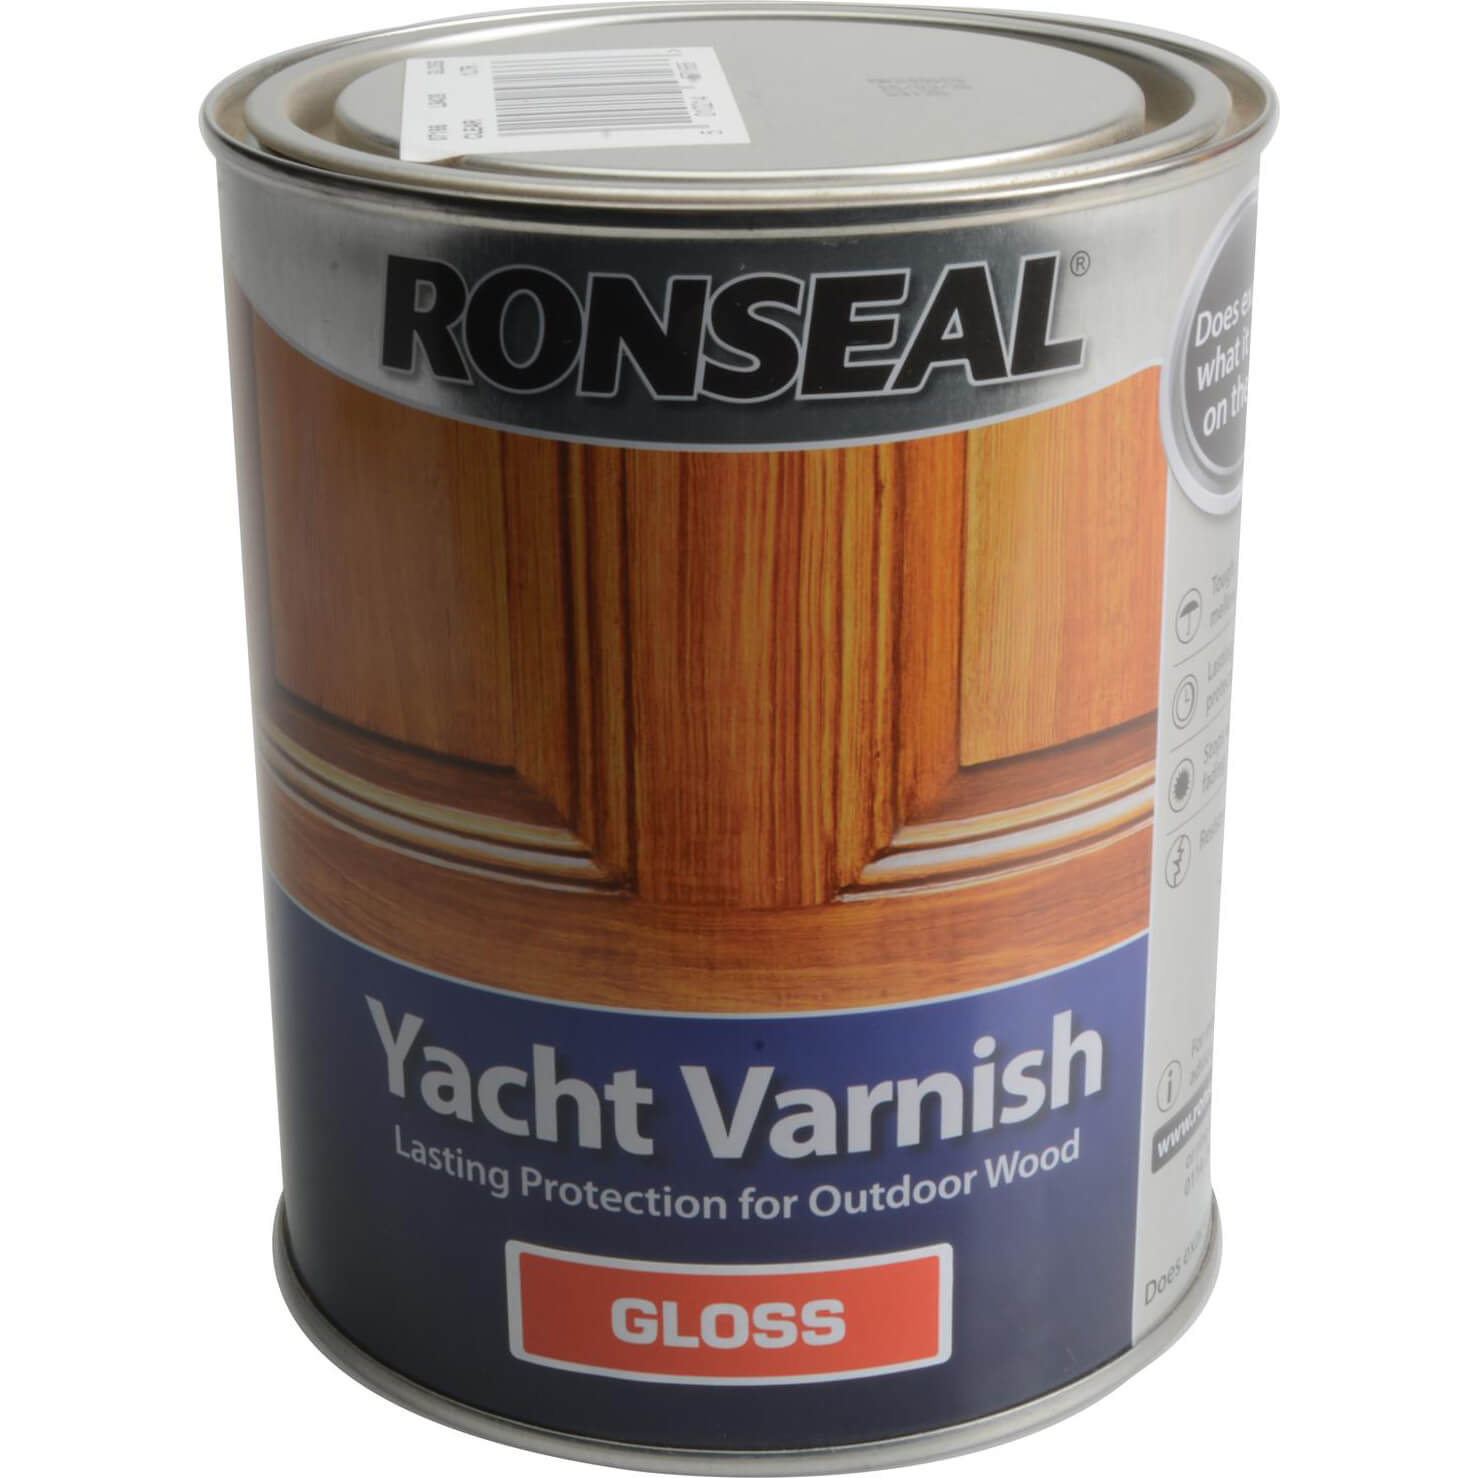 Image of Ronseal Exterior Yacht Varnish Gloss 1l